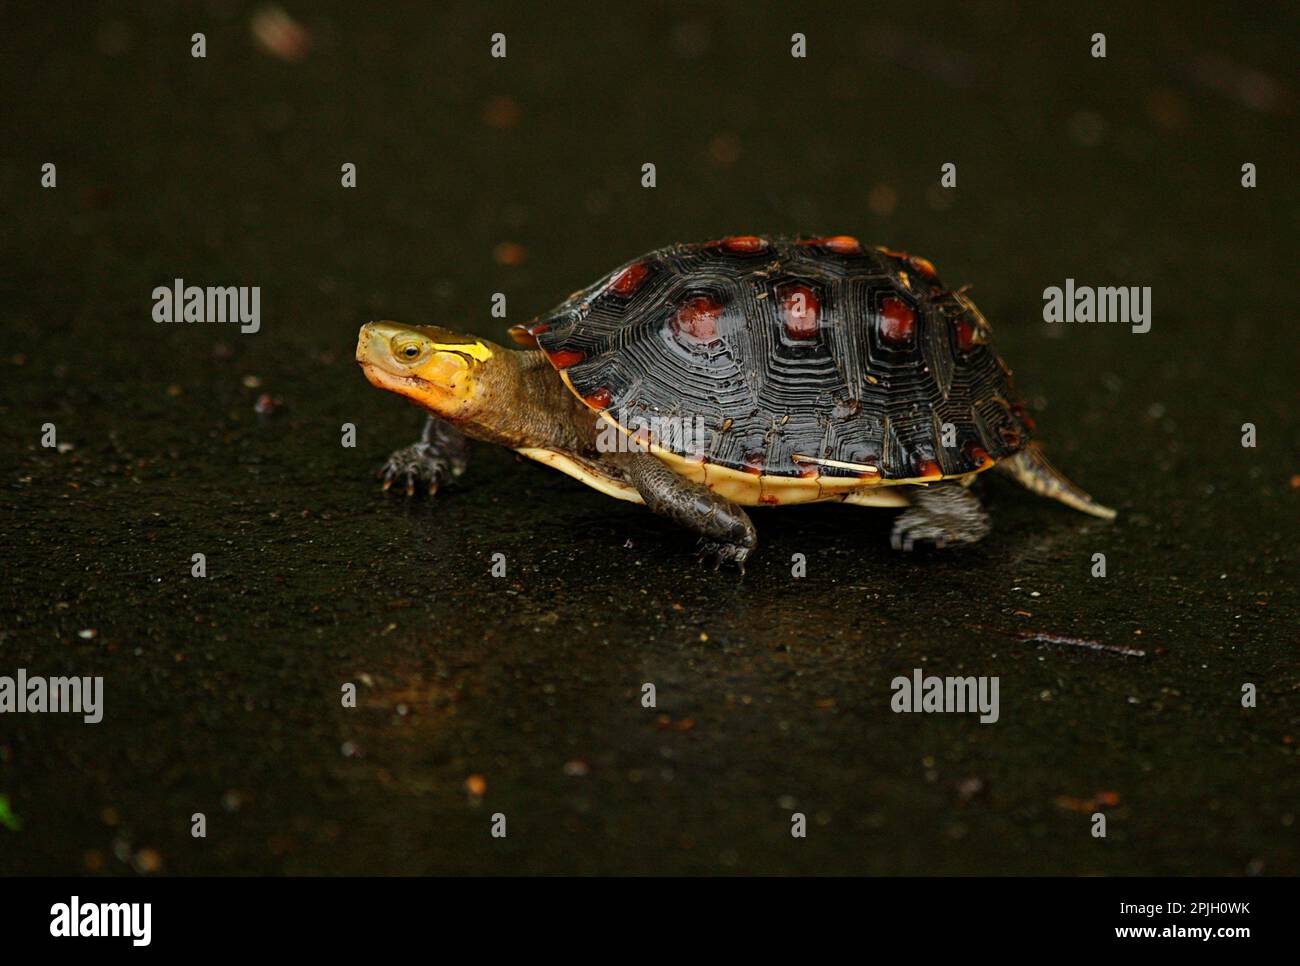 Chinese box turtle (Cistoclemmys flavomarginata) adult, crossing wet road in rain, Taiwan Stock Photo